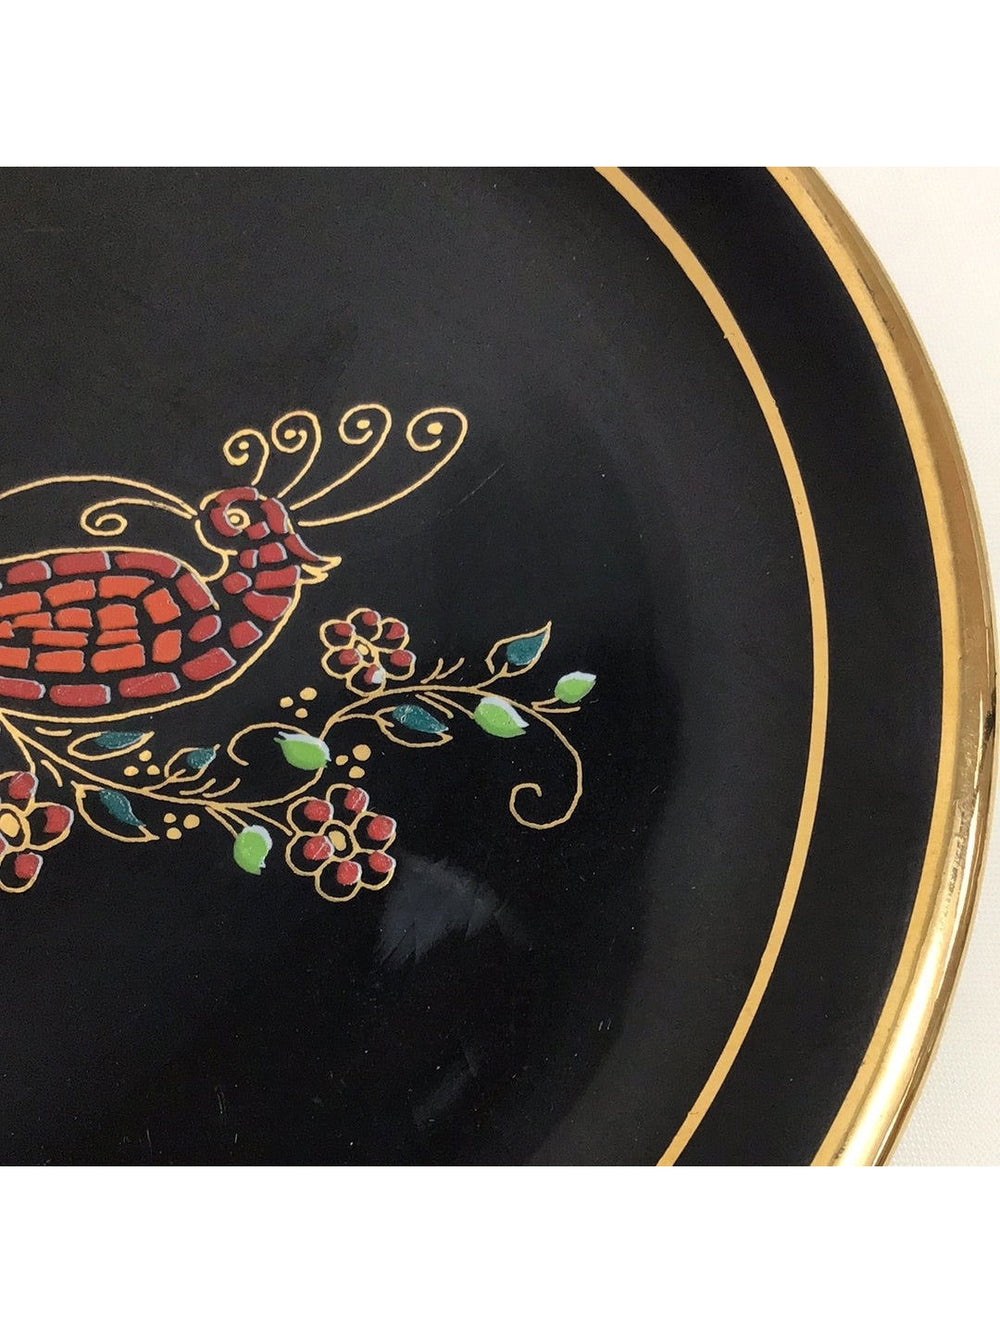 Vintage P Anapale Black with Bird Trinket Dish, 24k Trim - The Kennedy Collective Thrift - 